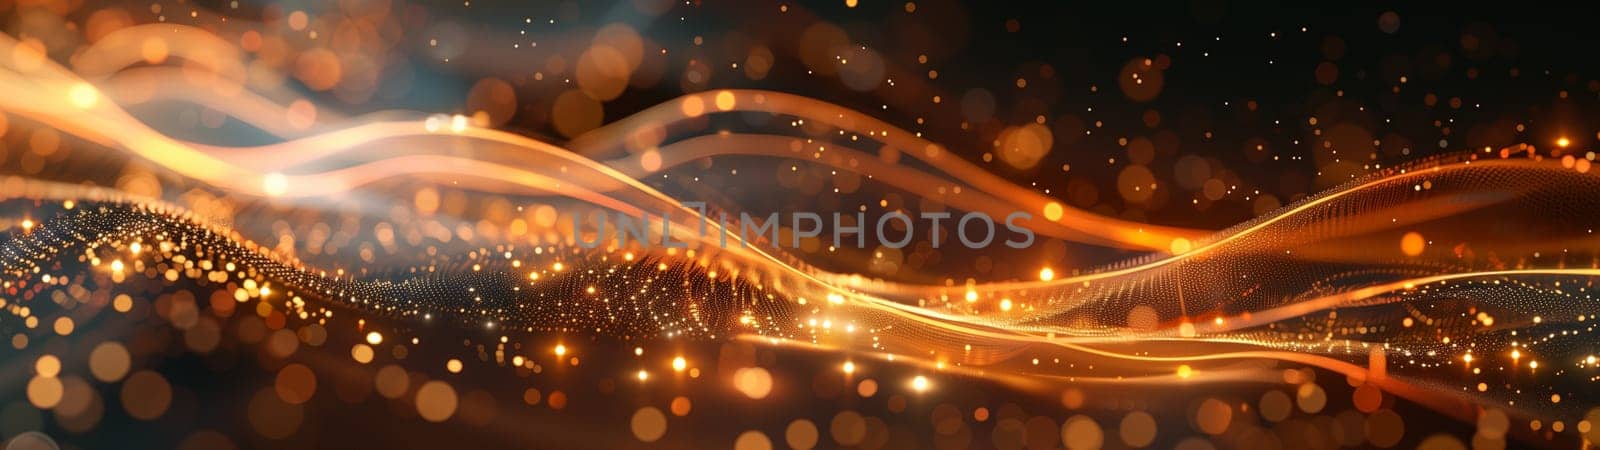 Colorful abstract 3d background with microparticles and waves by NeuroSky